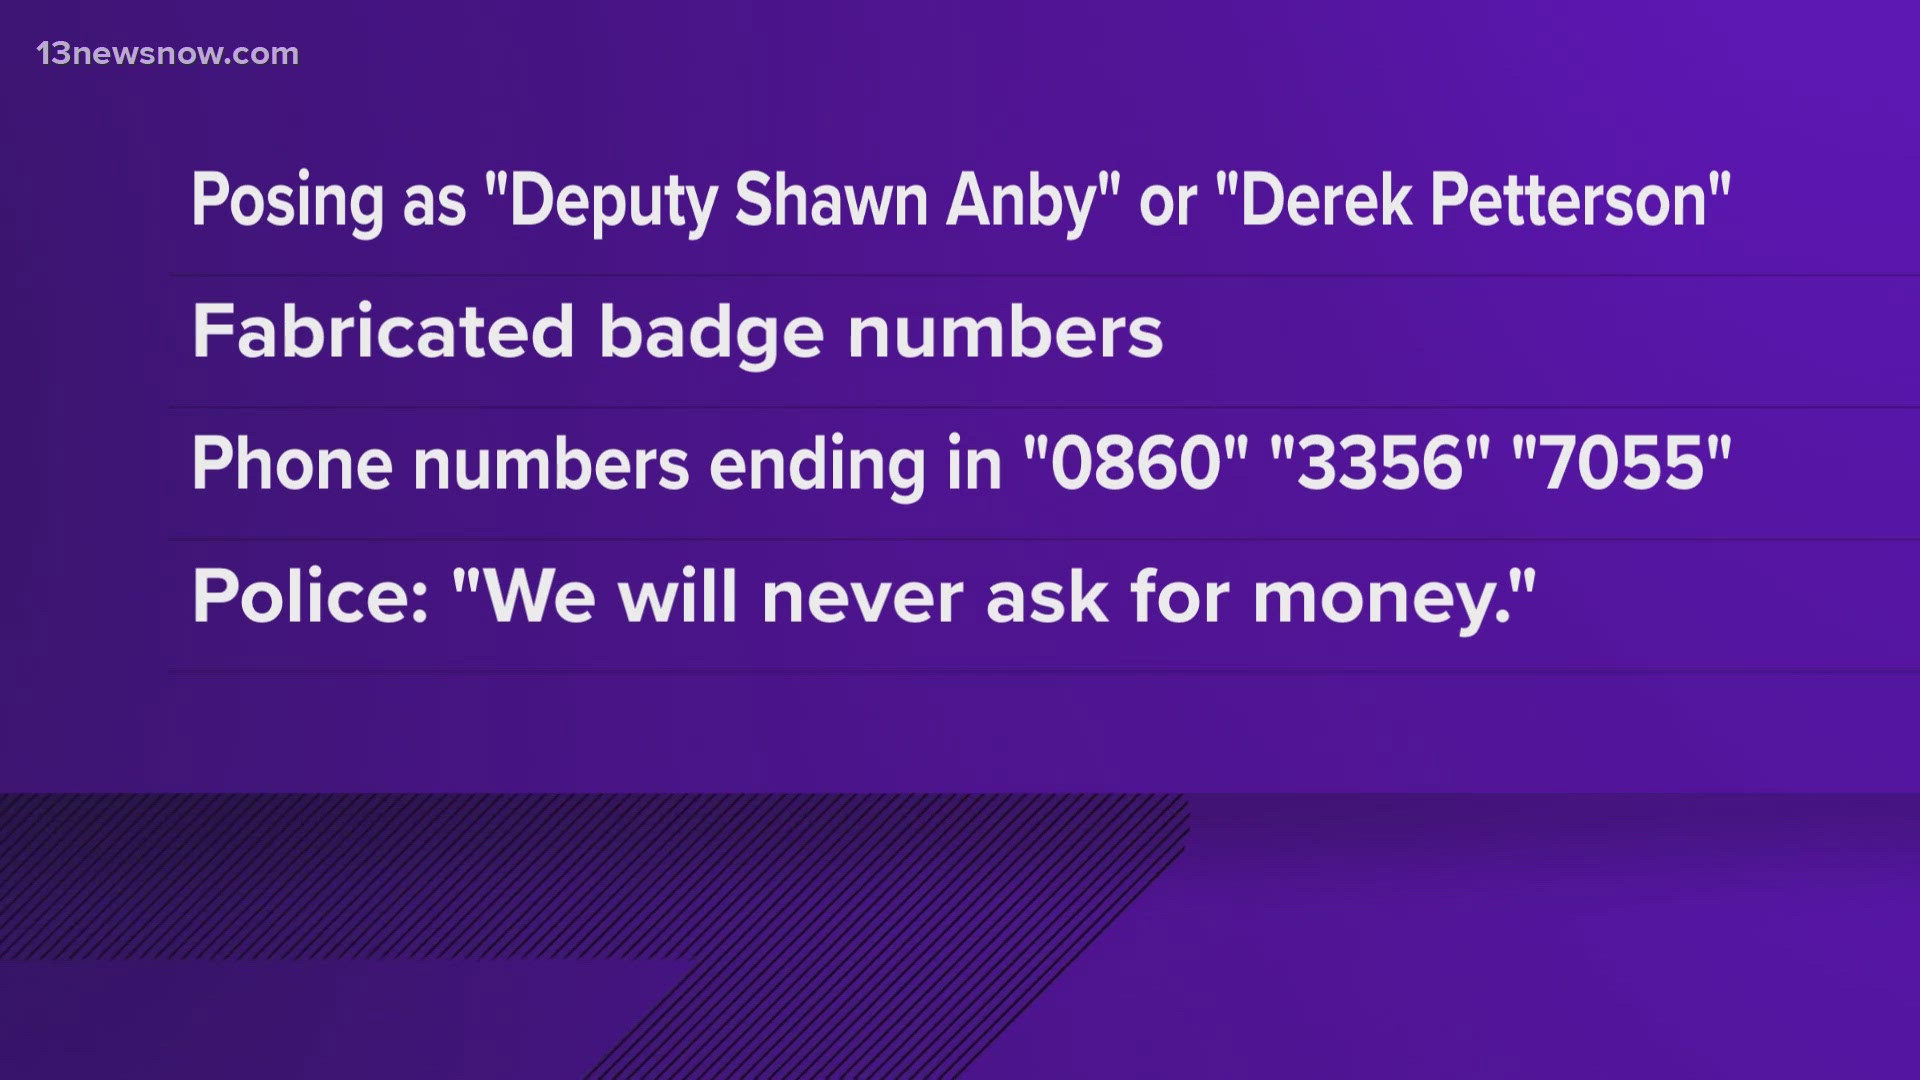 Police say the scammers are posing as law enforcement under aliases like Deputy Shawn Anby or Derek Peterson.